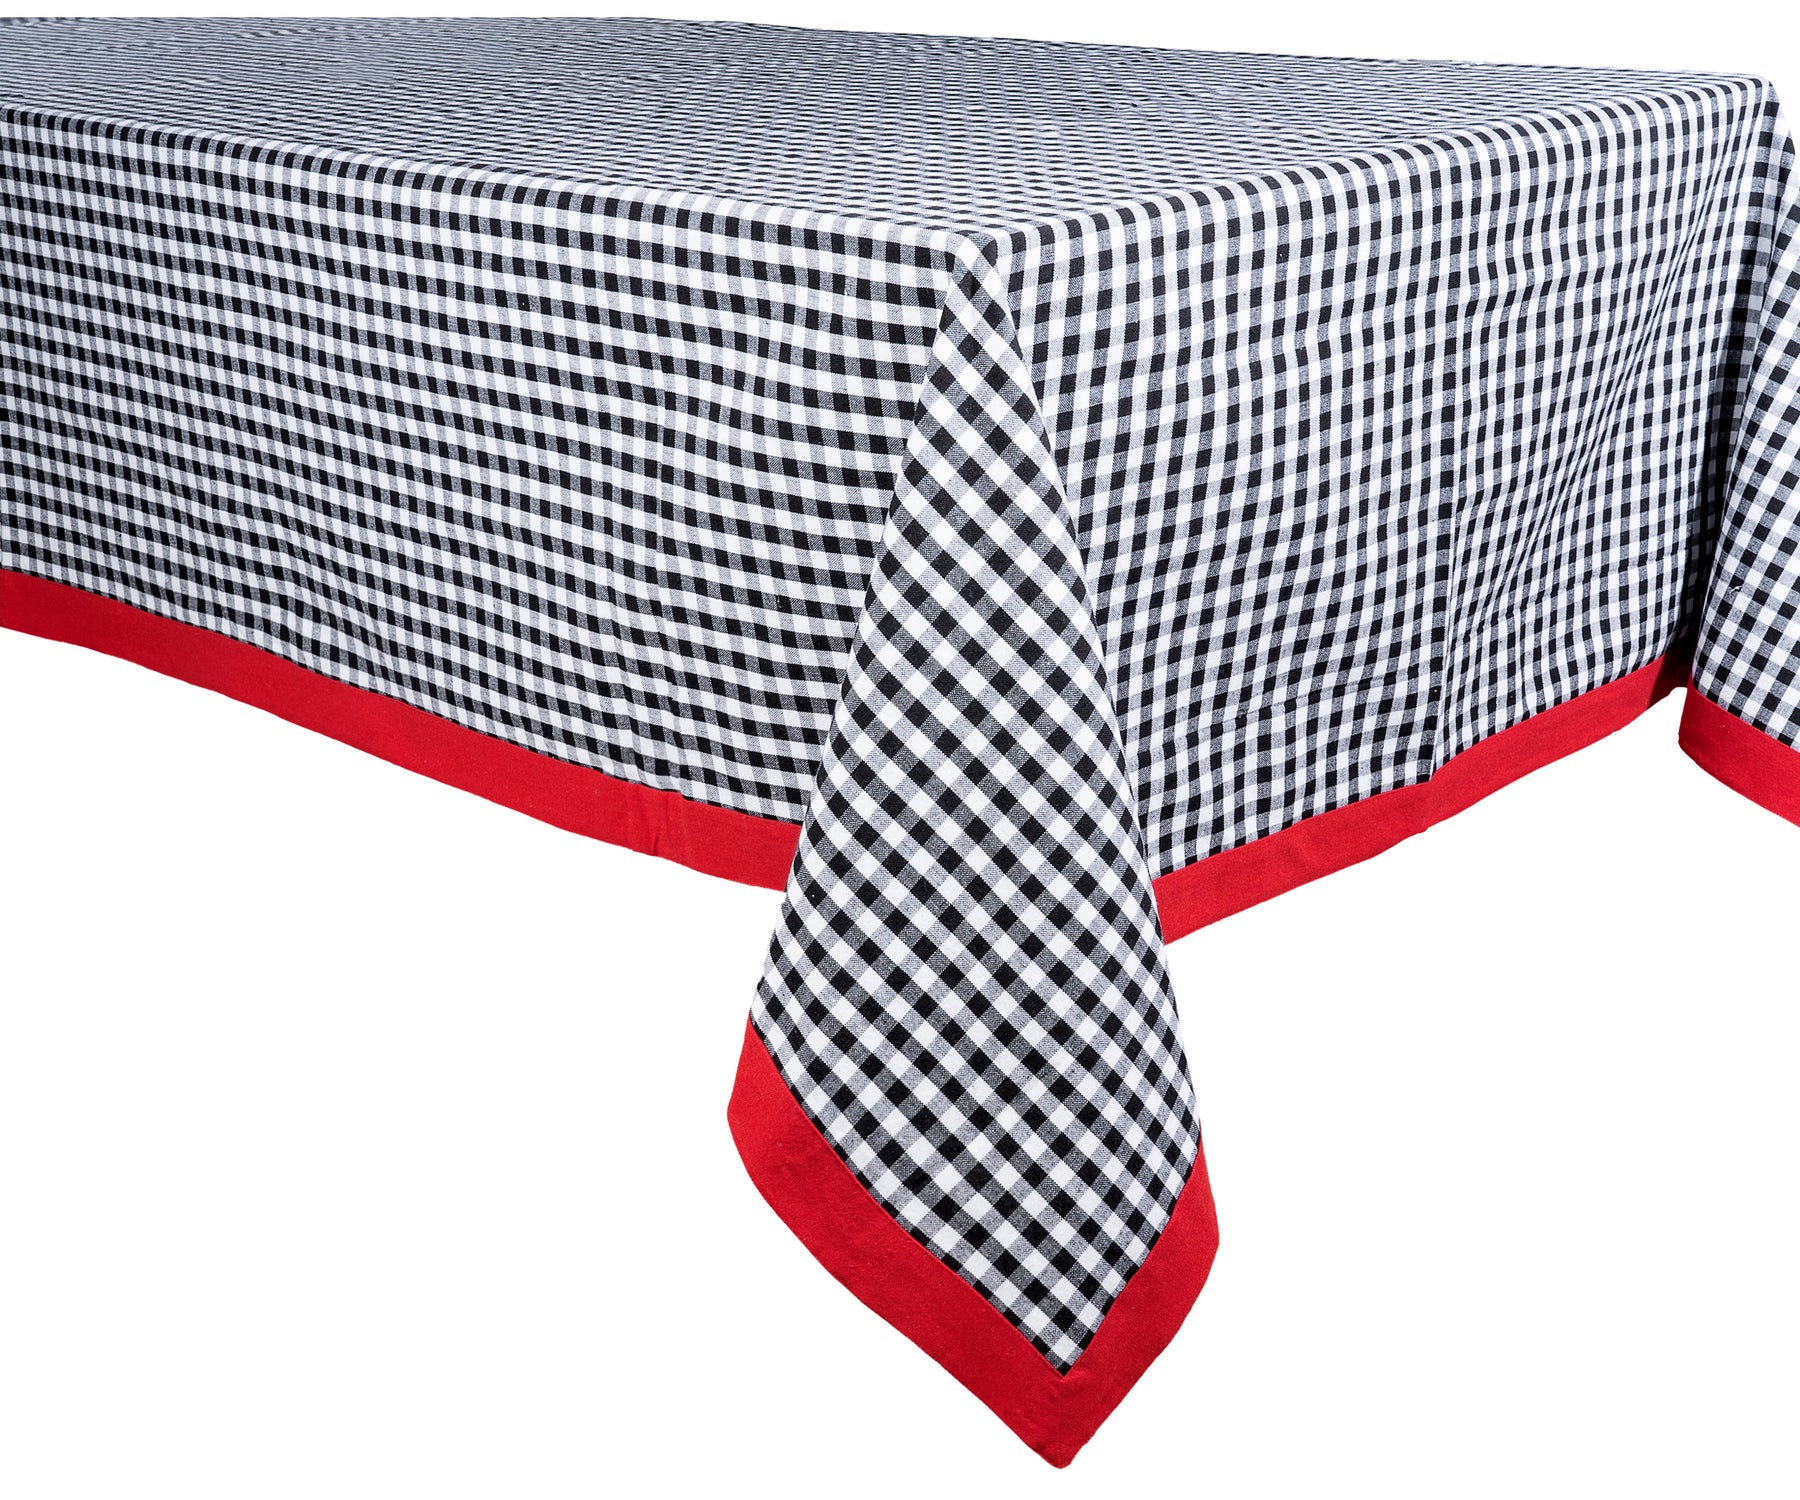 Cotton tablecloth suitable for family dinners or special occasions.